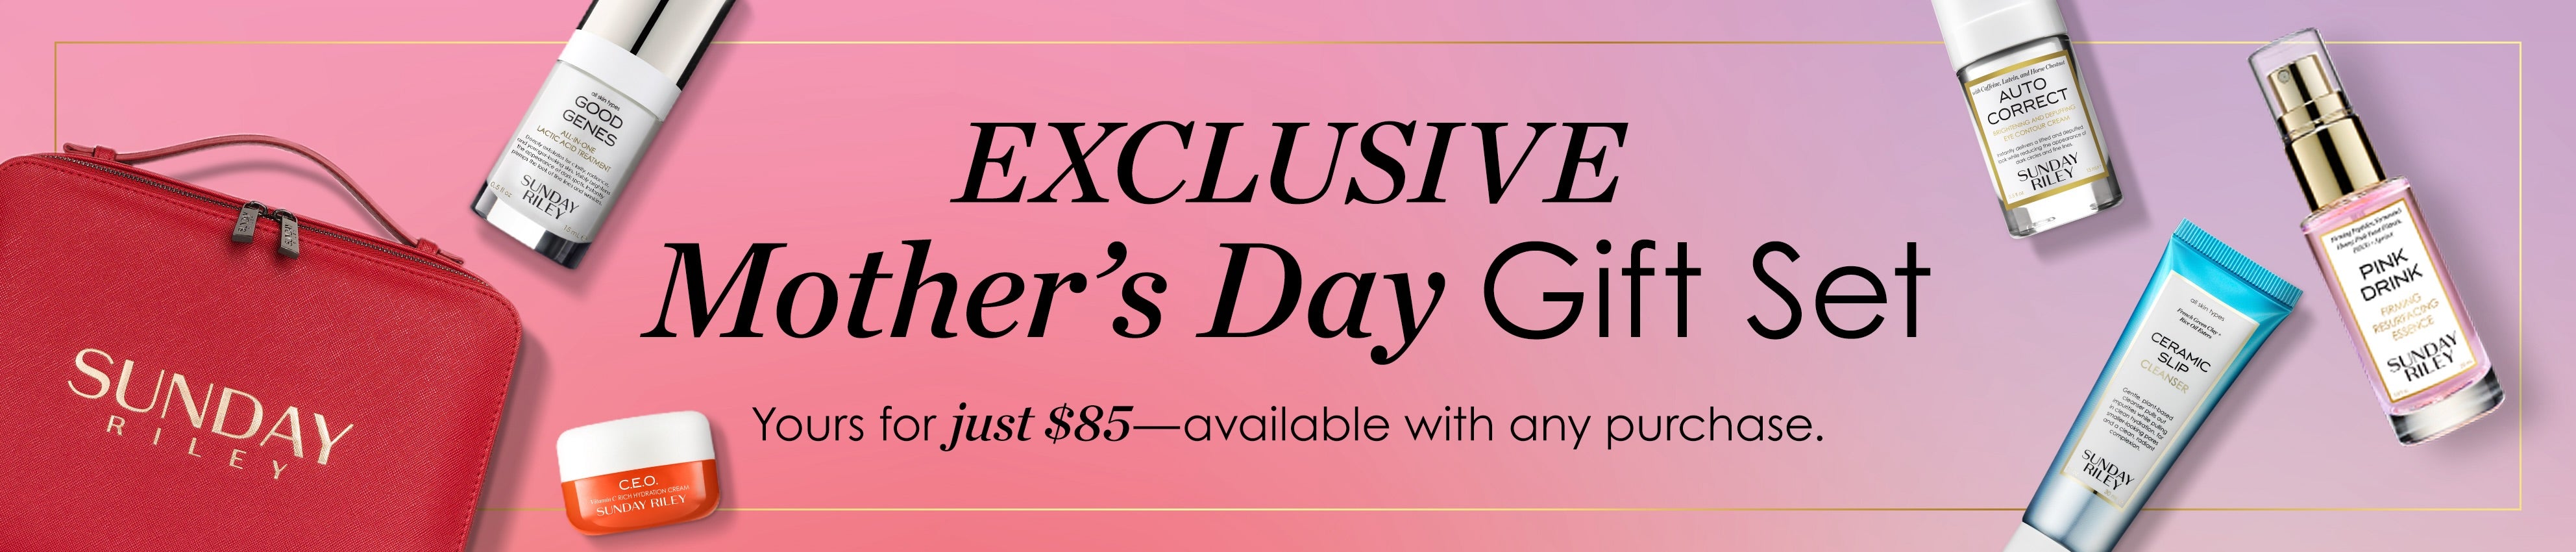 Make her day - exclusive gift set - get this special gift set for JUST $85 available with any purchase